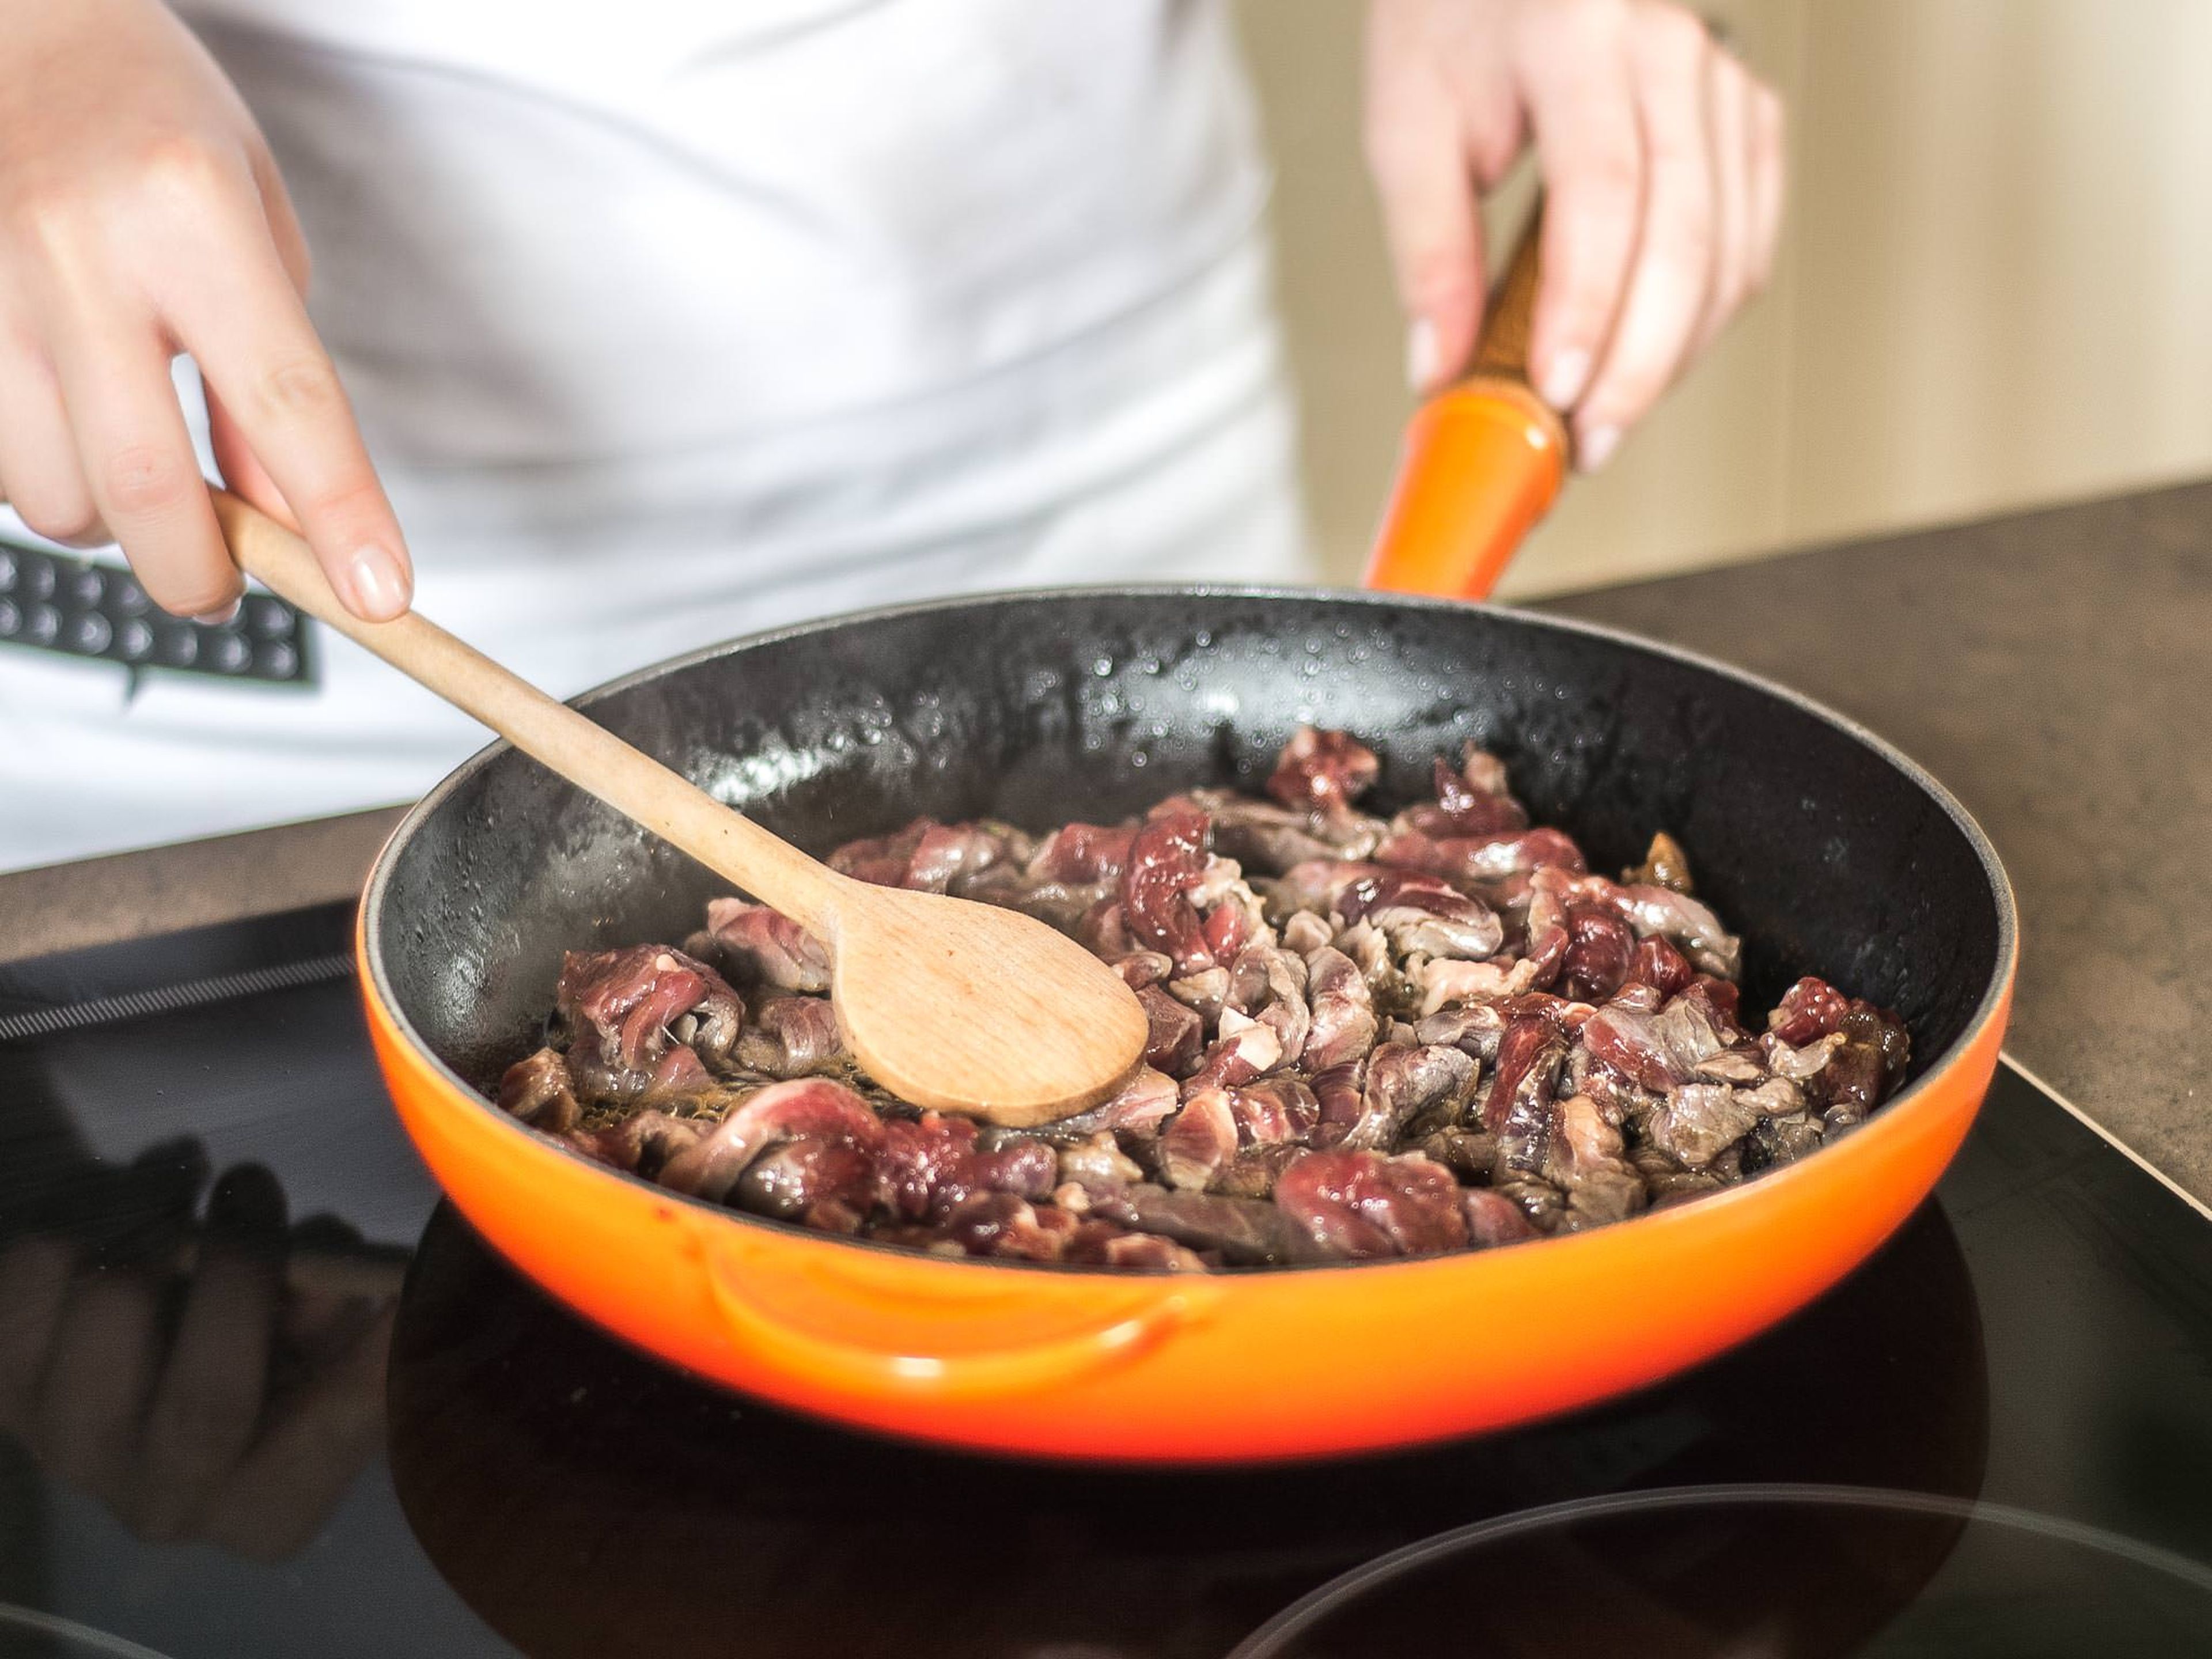 Brown the beef strips on all sides in a hot frying pan with some vegetable oil for approx. 3 – 5 min.